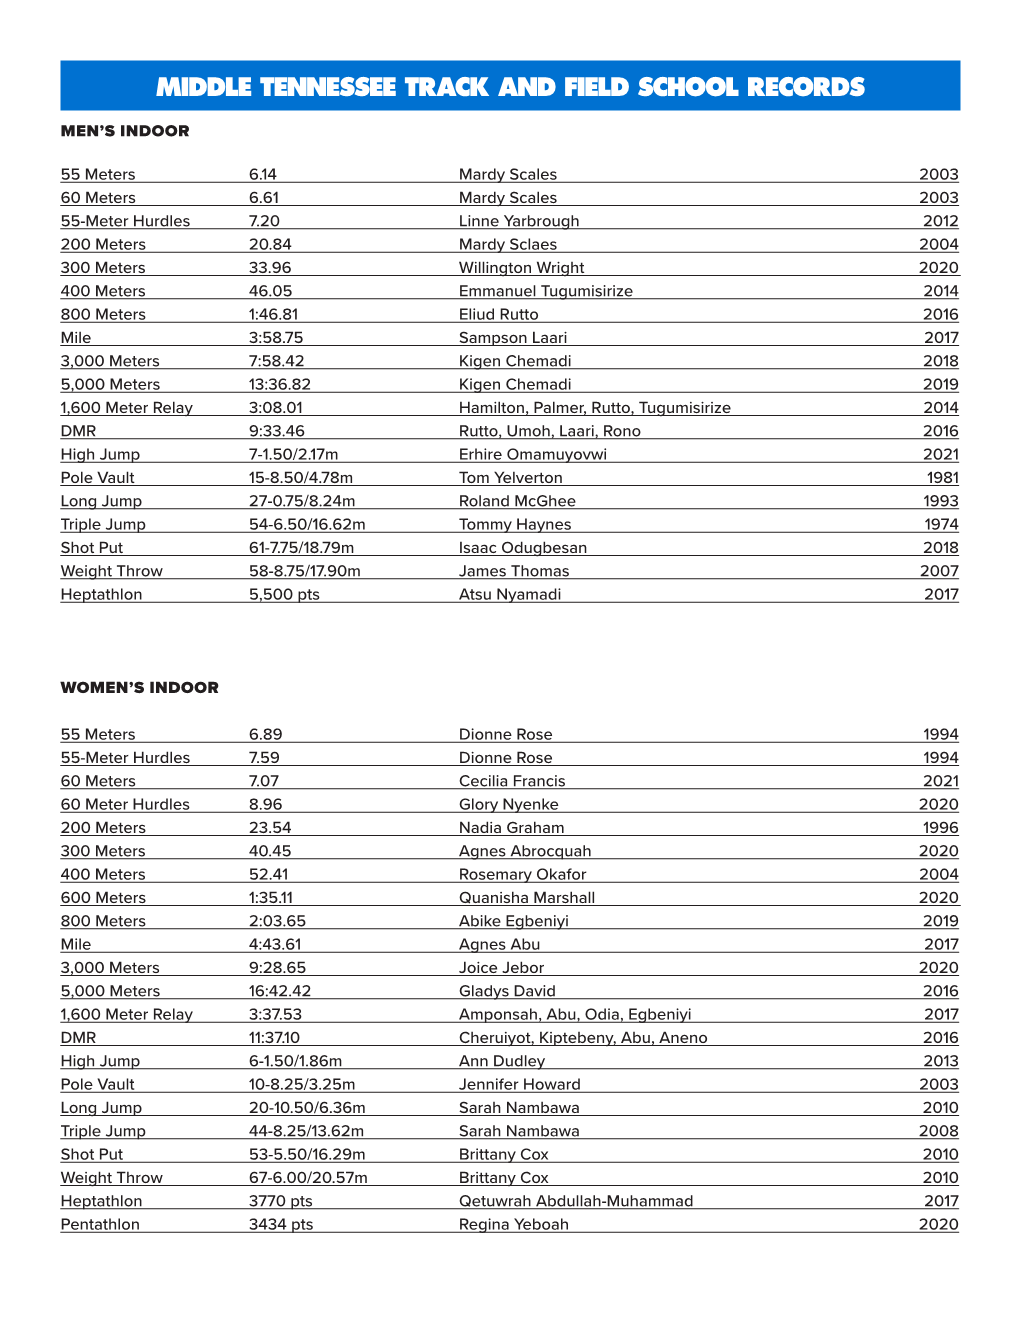 Middle Tennessee Track and Field School Records